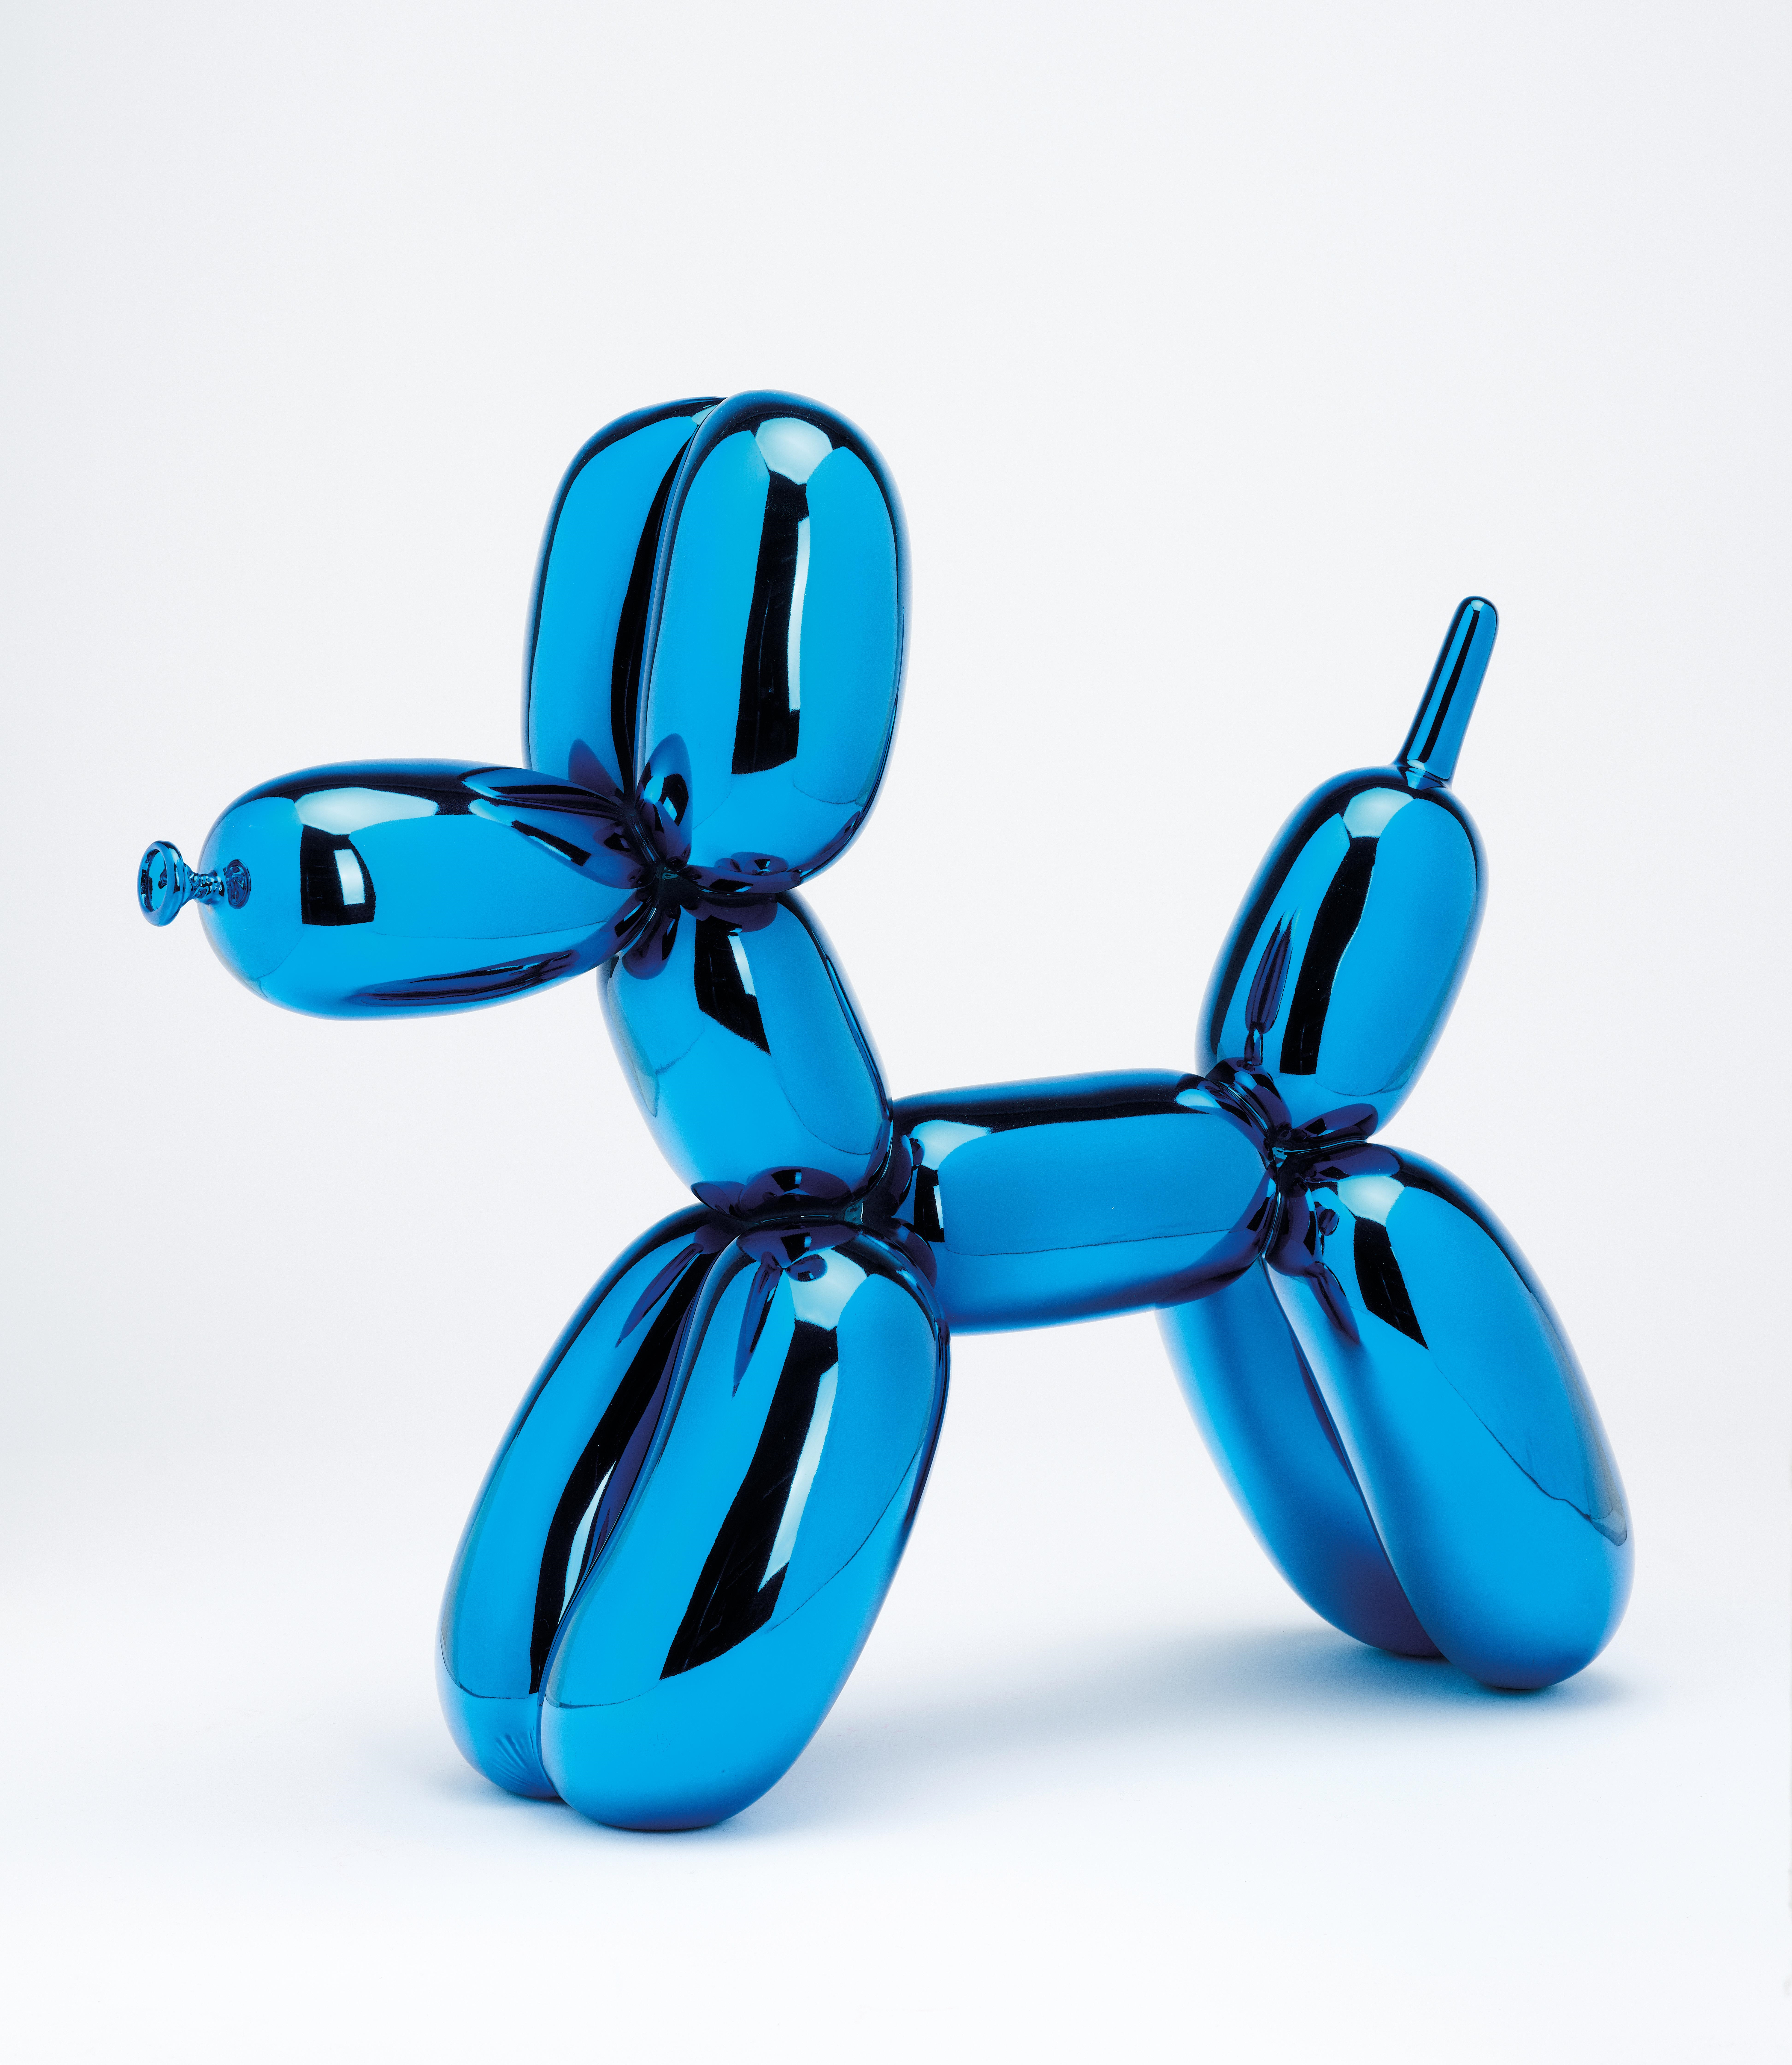 Balloon Dog (Blue) by Jeff Koons, 2021